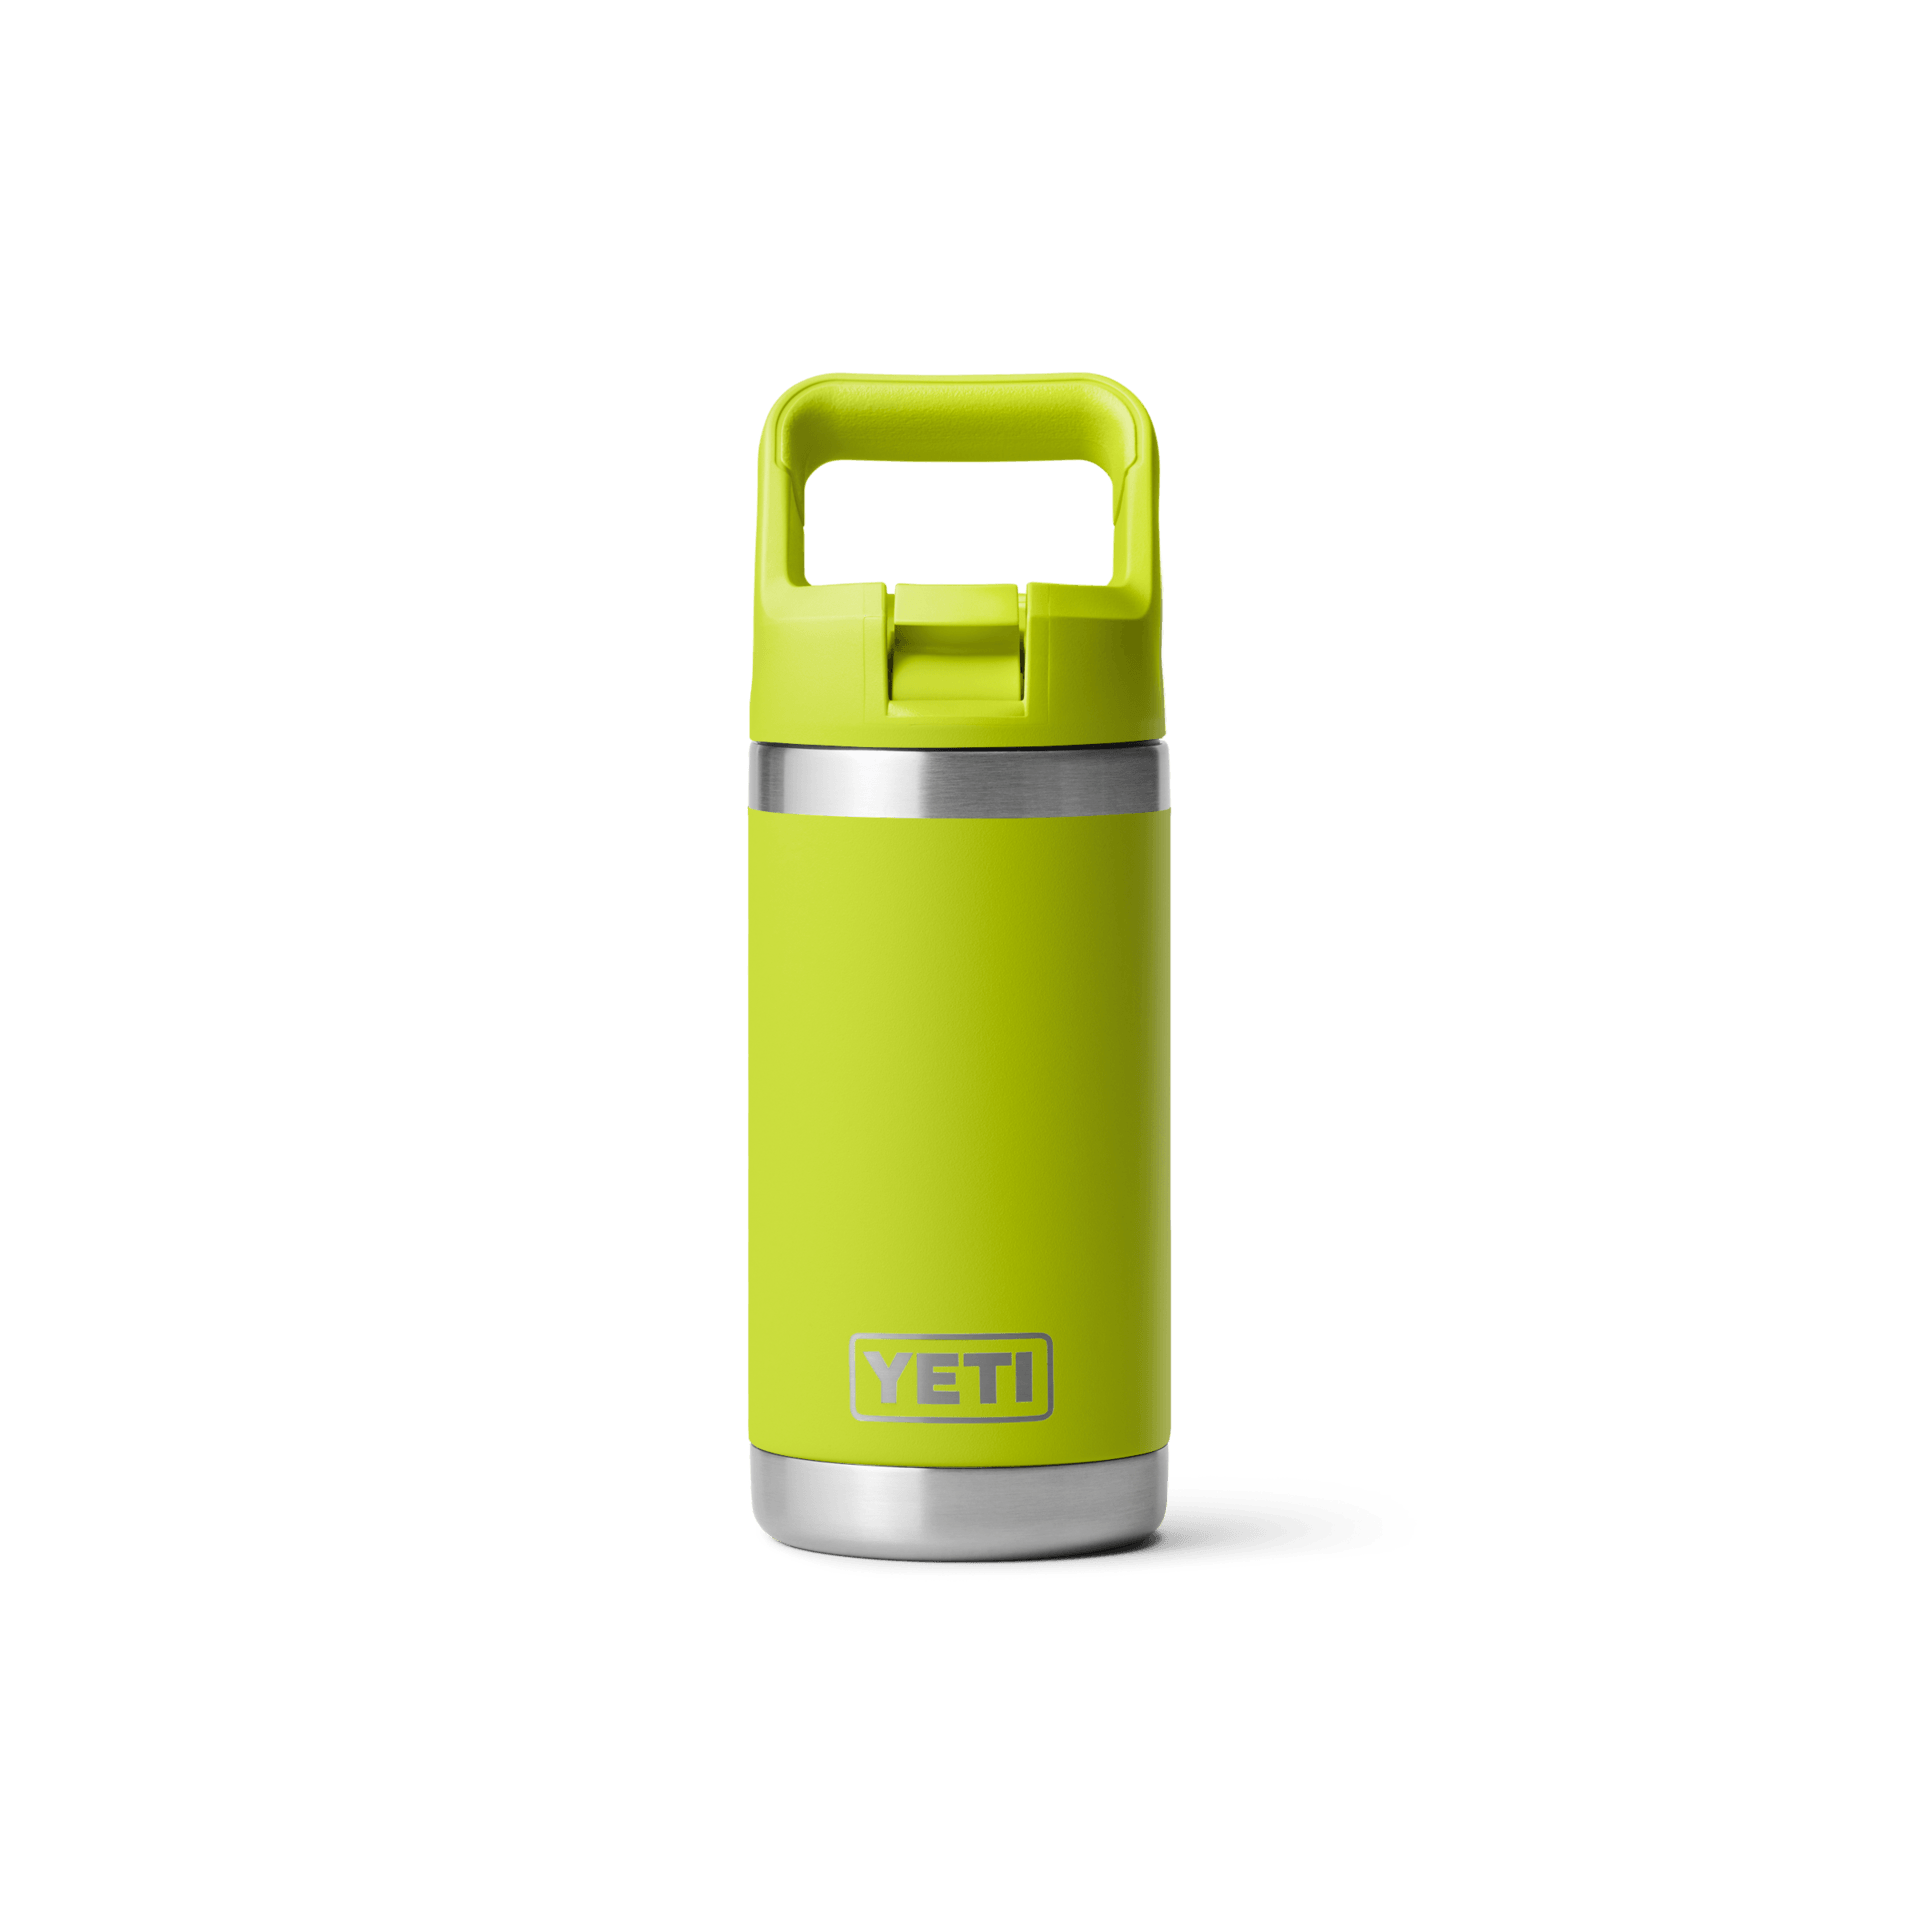 Yeti Rambler Jr. Water Bottle with Straw Cap - Chartreuse, 12 oz 🎾🎾 RARE  NWT